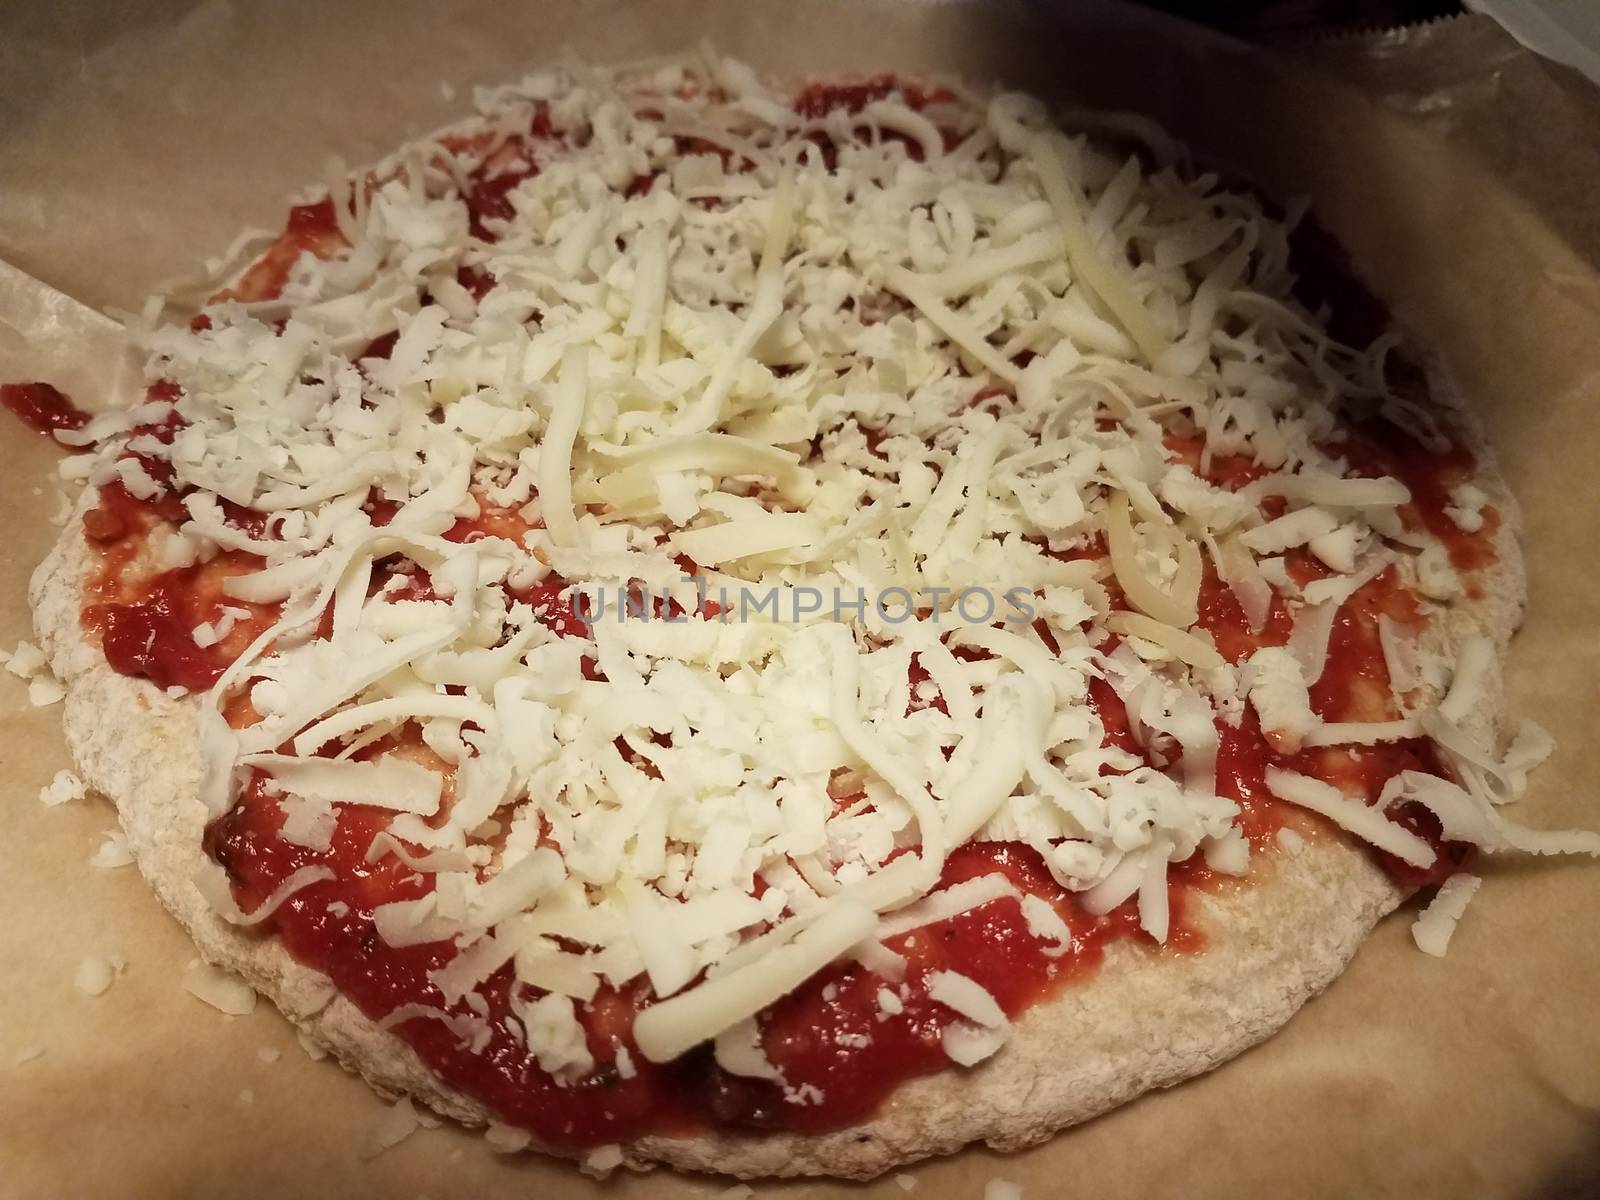 pizza dough and tomato sauce and cheese on wax paper by stockphotofan1